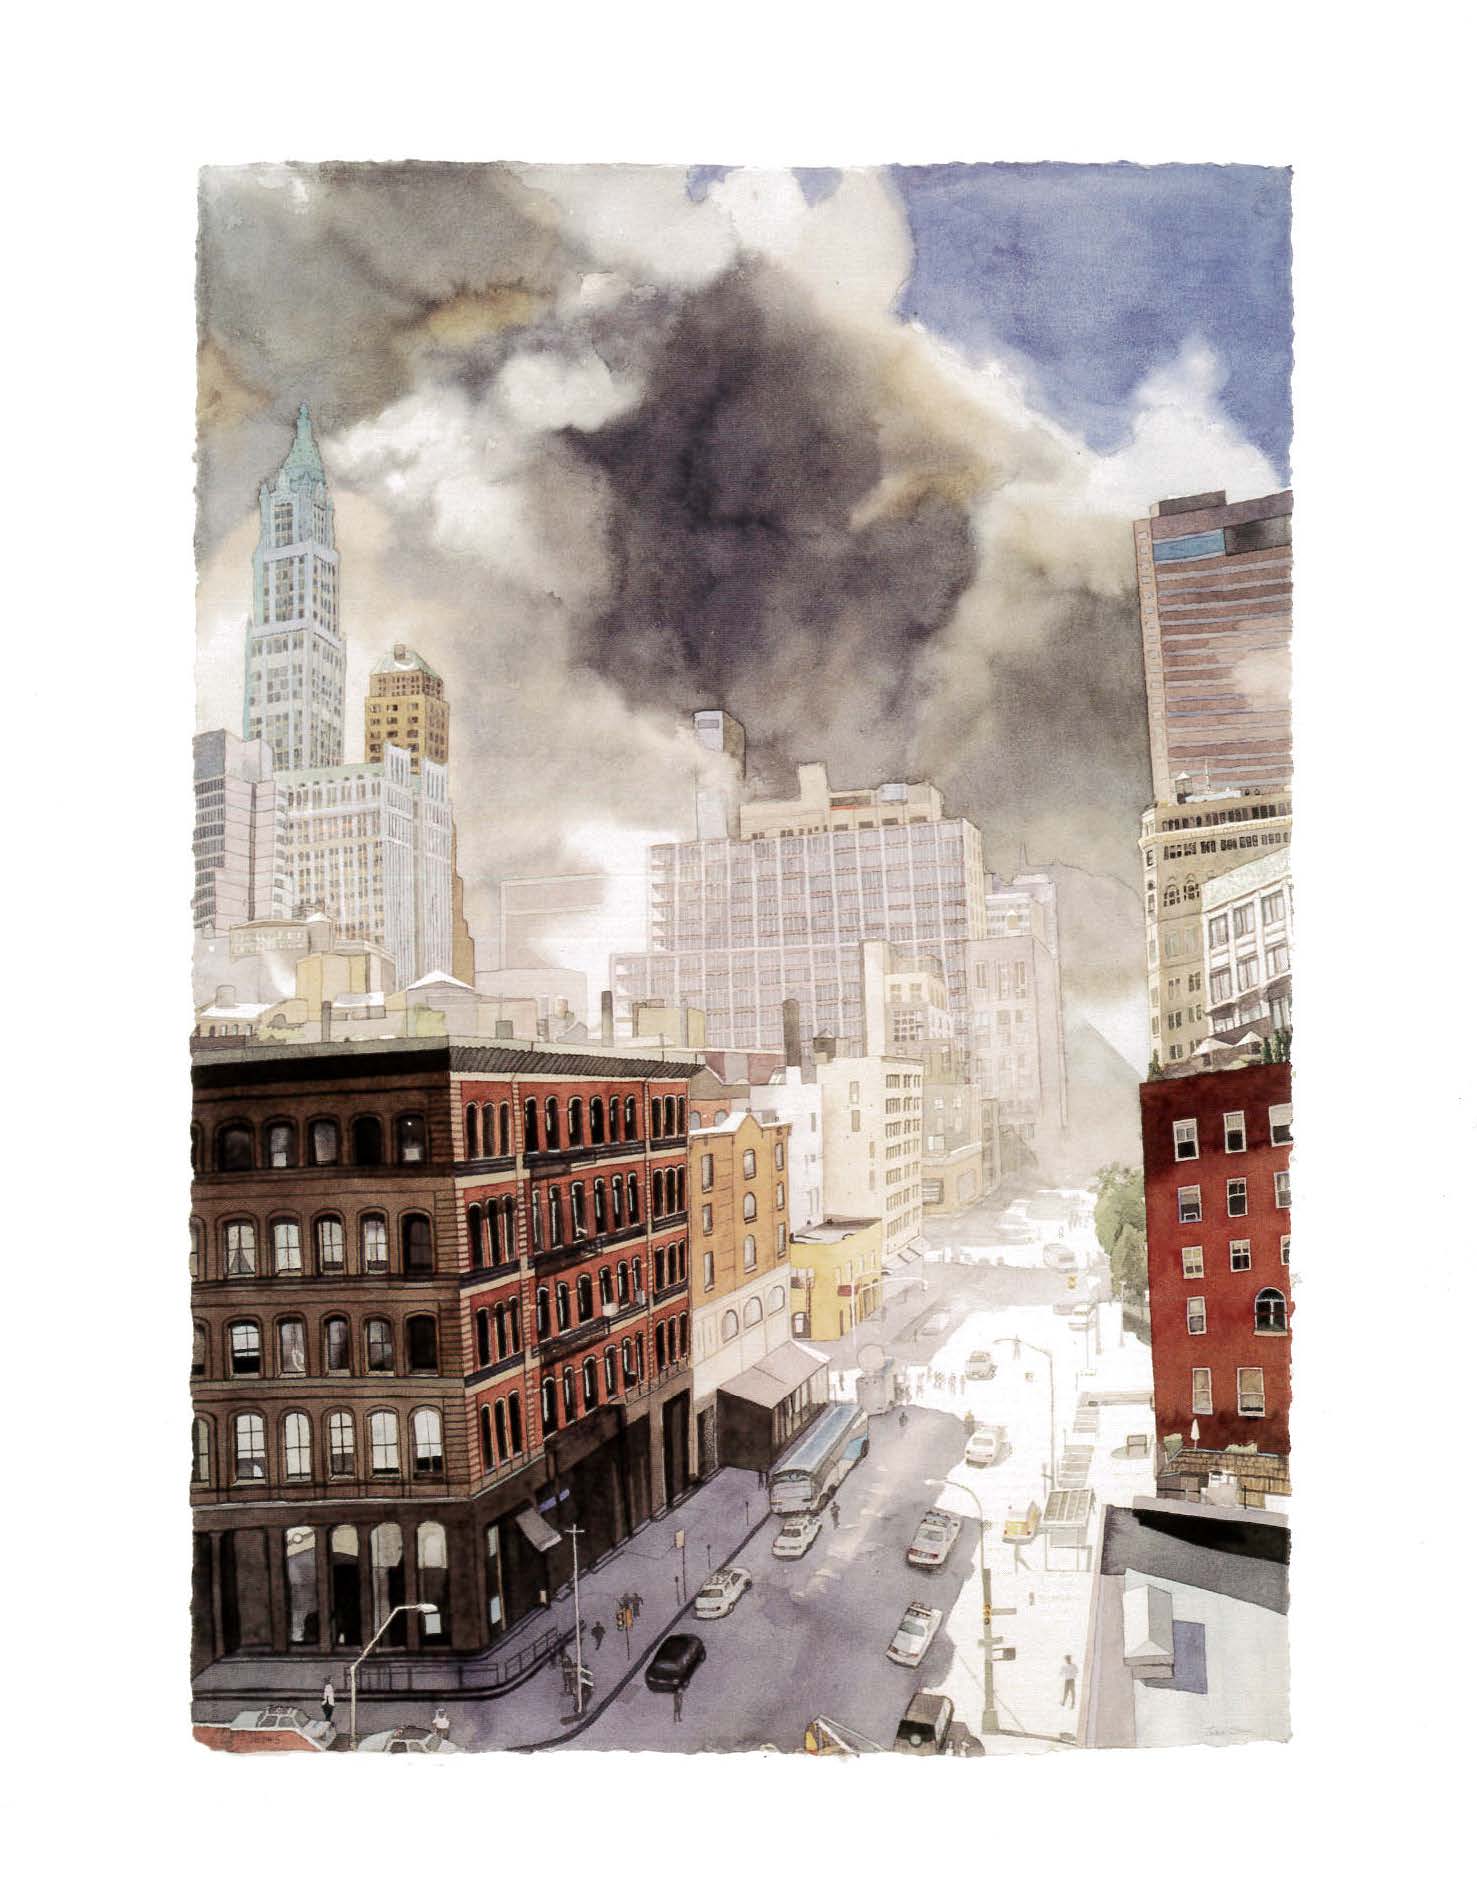 An artist's illustration of the cloud of dark smoke filling the streets of Lower Manhattan on 9/11.